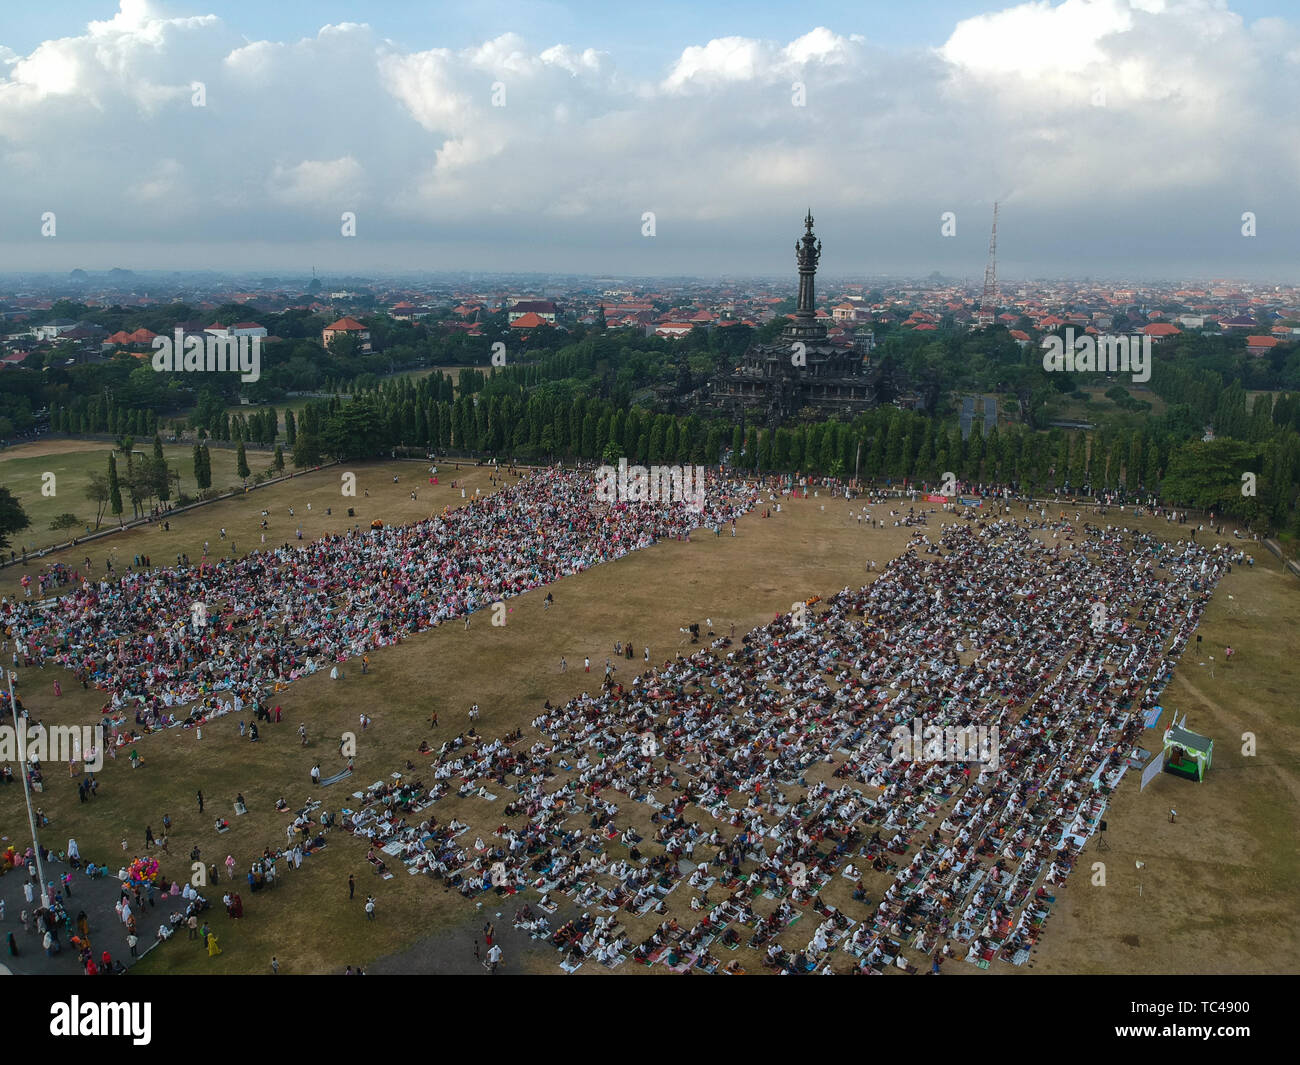 The view from the air of the Eid al-Fitr prayer in 2019 at Puputan Renon field. Eid prayers were attended by th Stock Photo